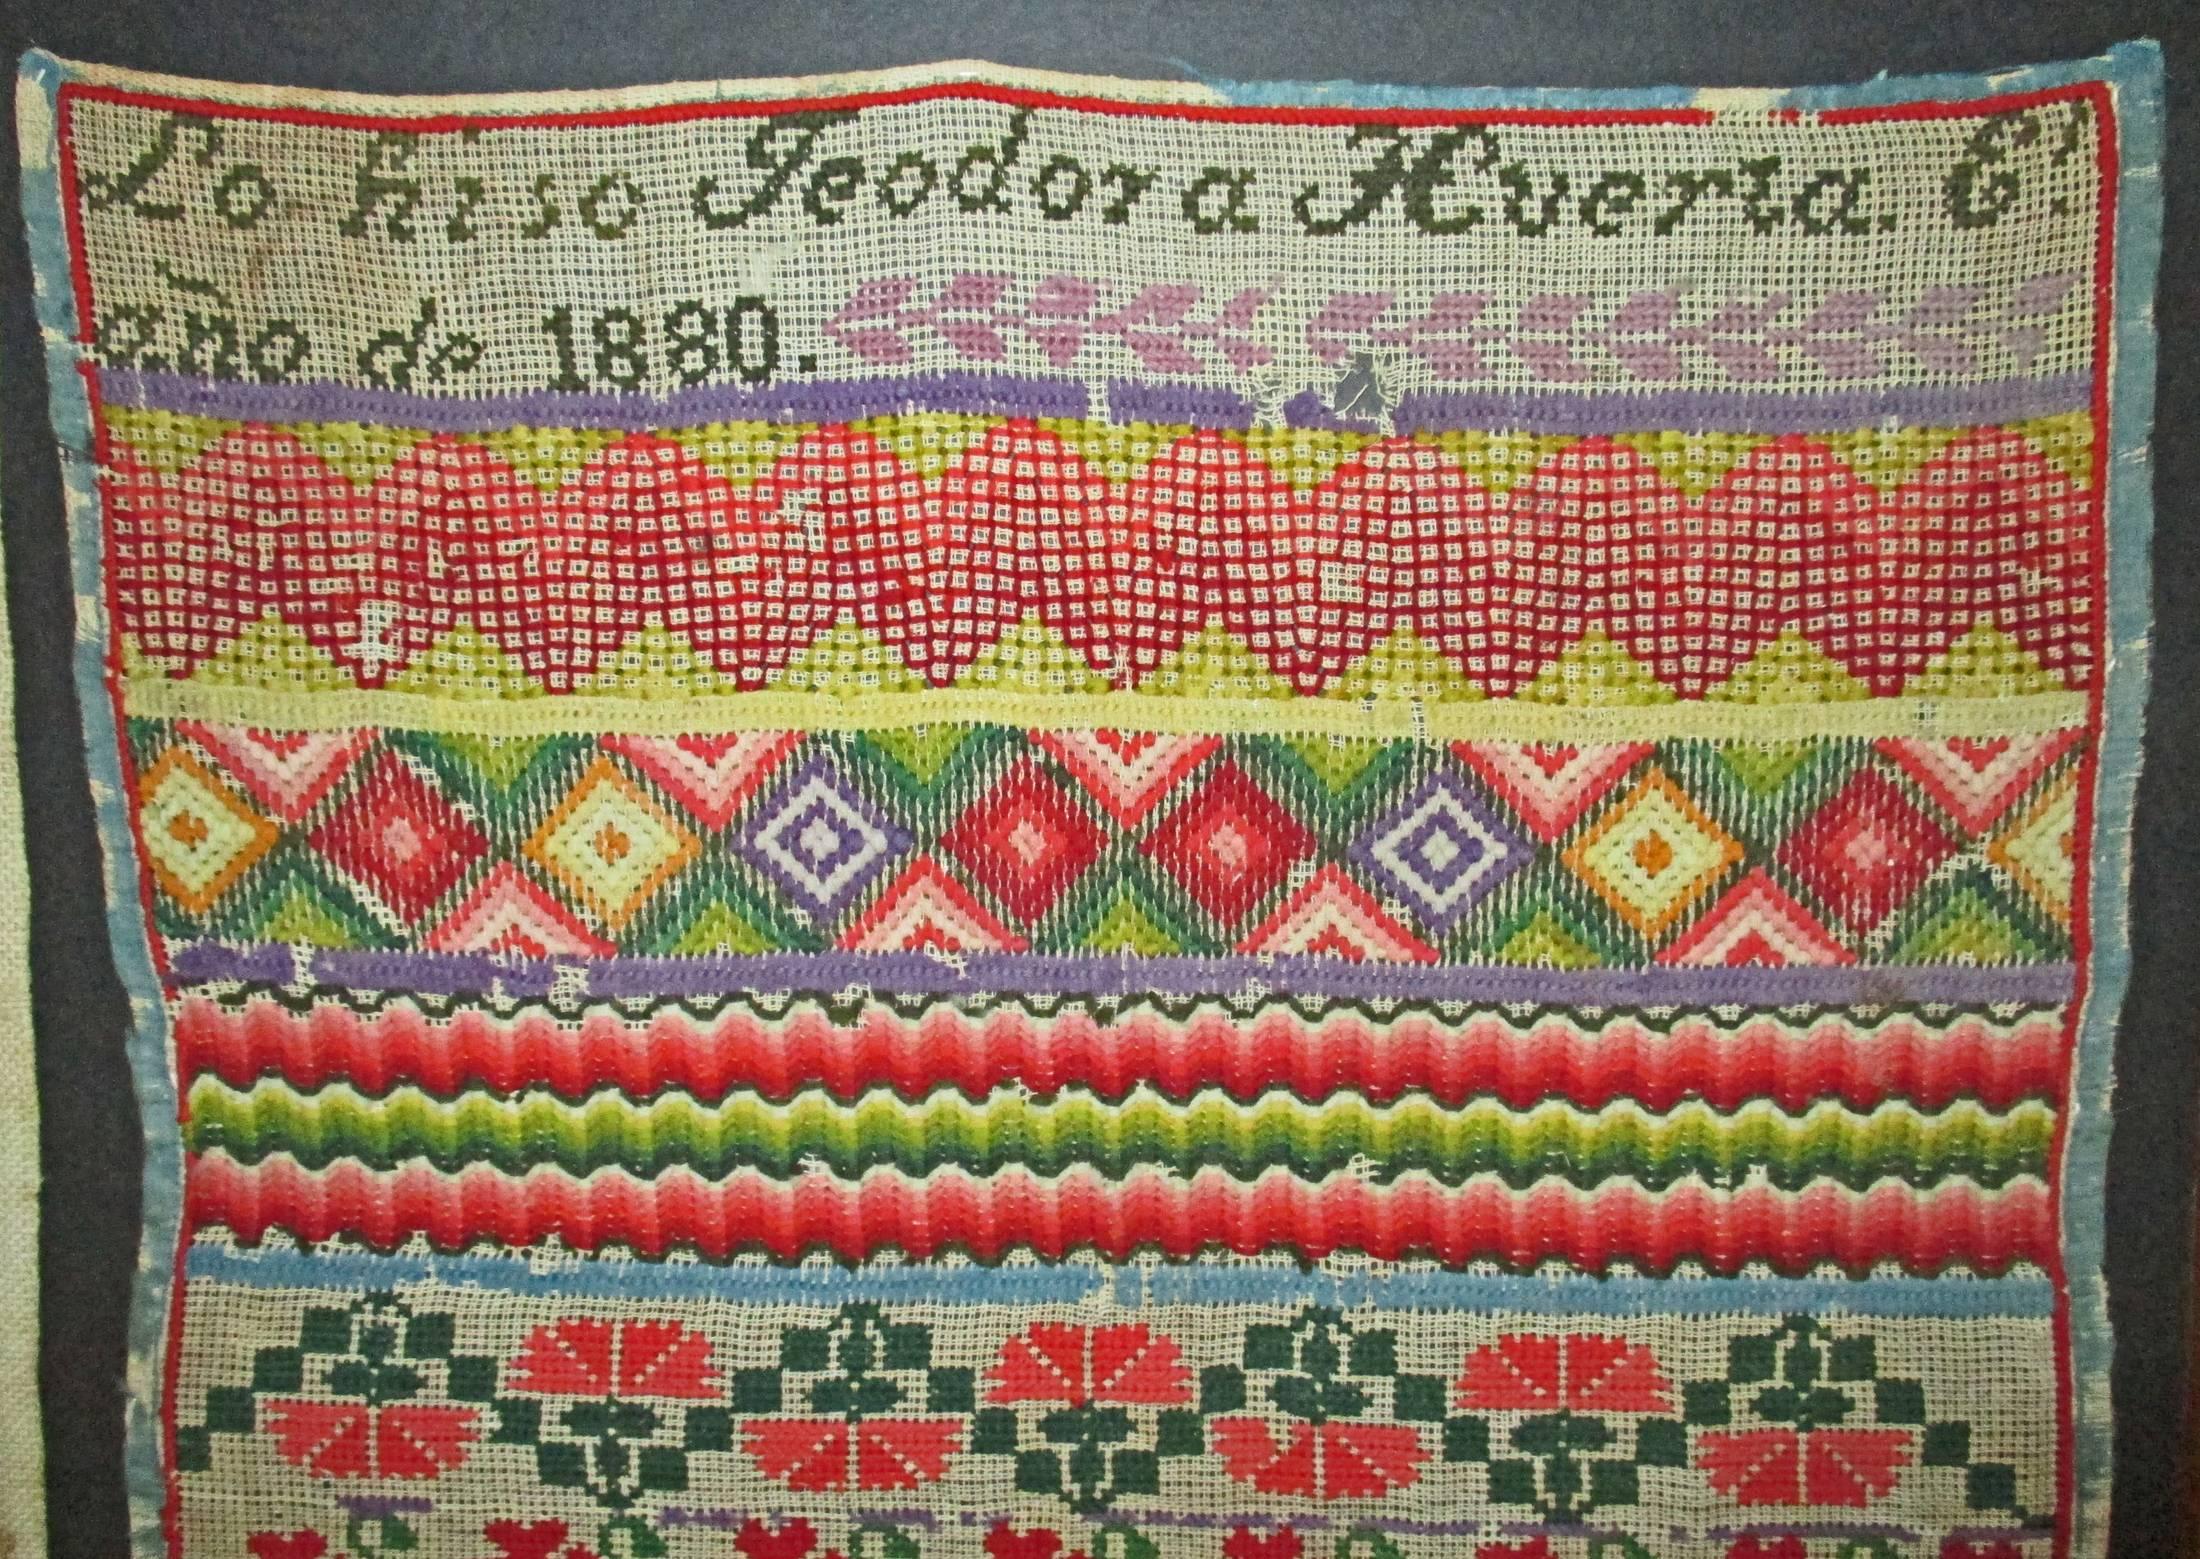 A rare find. These samplers were typically done by young girls in the monasteries of 19th century Mexico and did not leave the church so they are truly hard to find on the market. This one is unframed. The girls name was Teodora Huerta E. and this